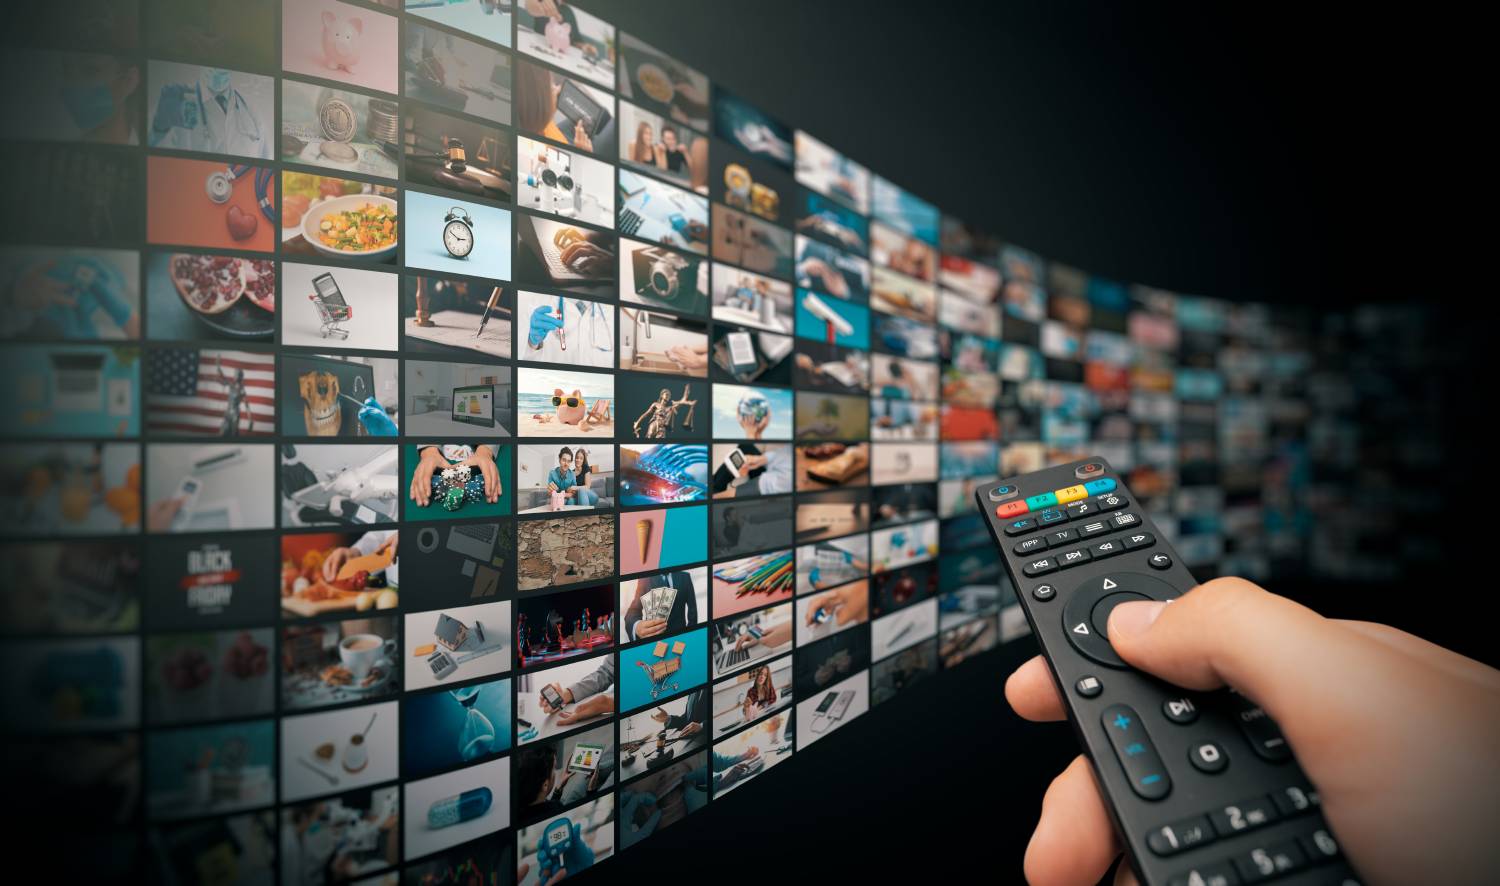 Analyzing the data of an evolving video streaming service ecosystem